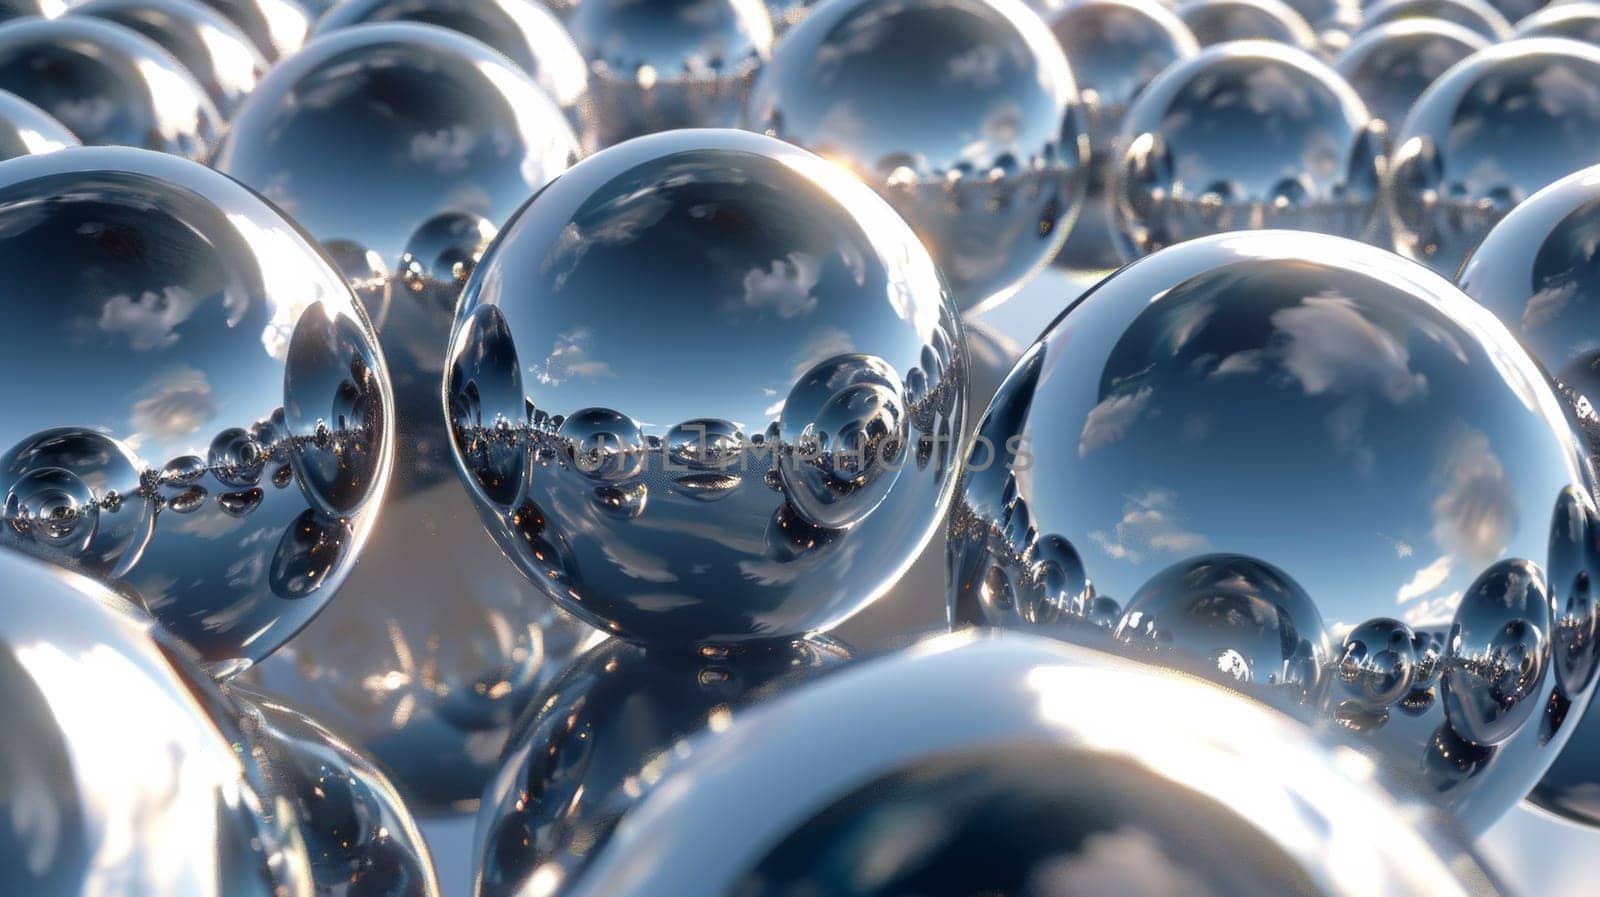 A group of shiny metal balls are arranged in a circle